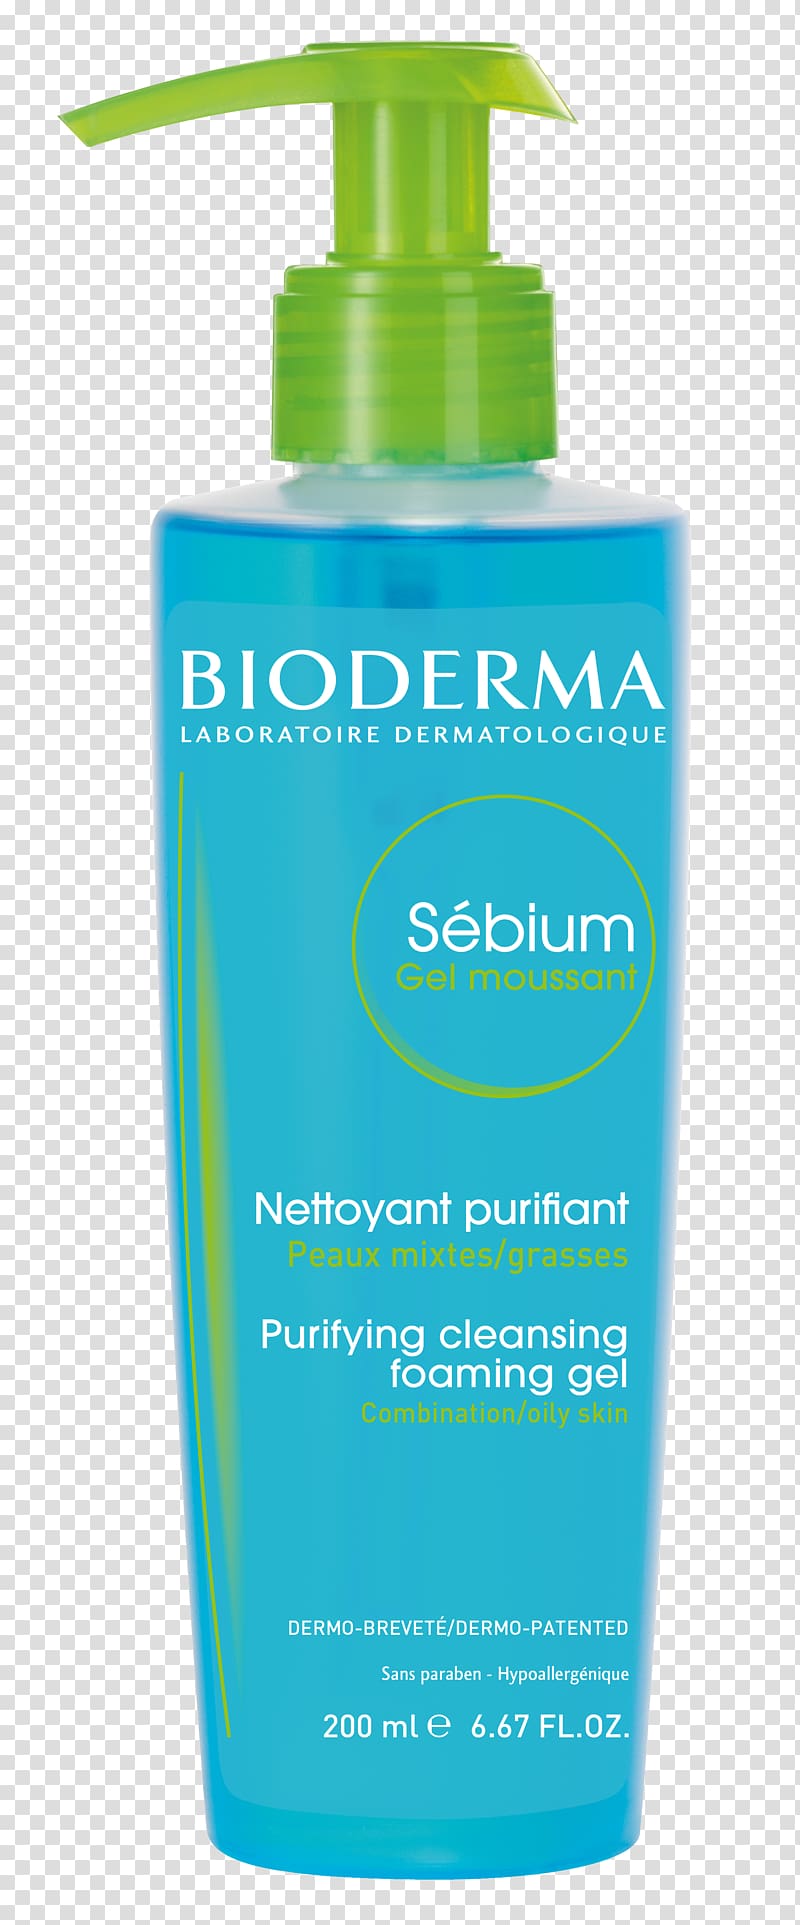 BIODERMA Sébium Purifying Cleansing Foaming Gel Cleanser BIODERMA Sensibio H2O BIODERMA Sébium H2O BIODERMA Sensibio Gel Moussant, Facial Cleanser transparent background PNG clipart